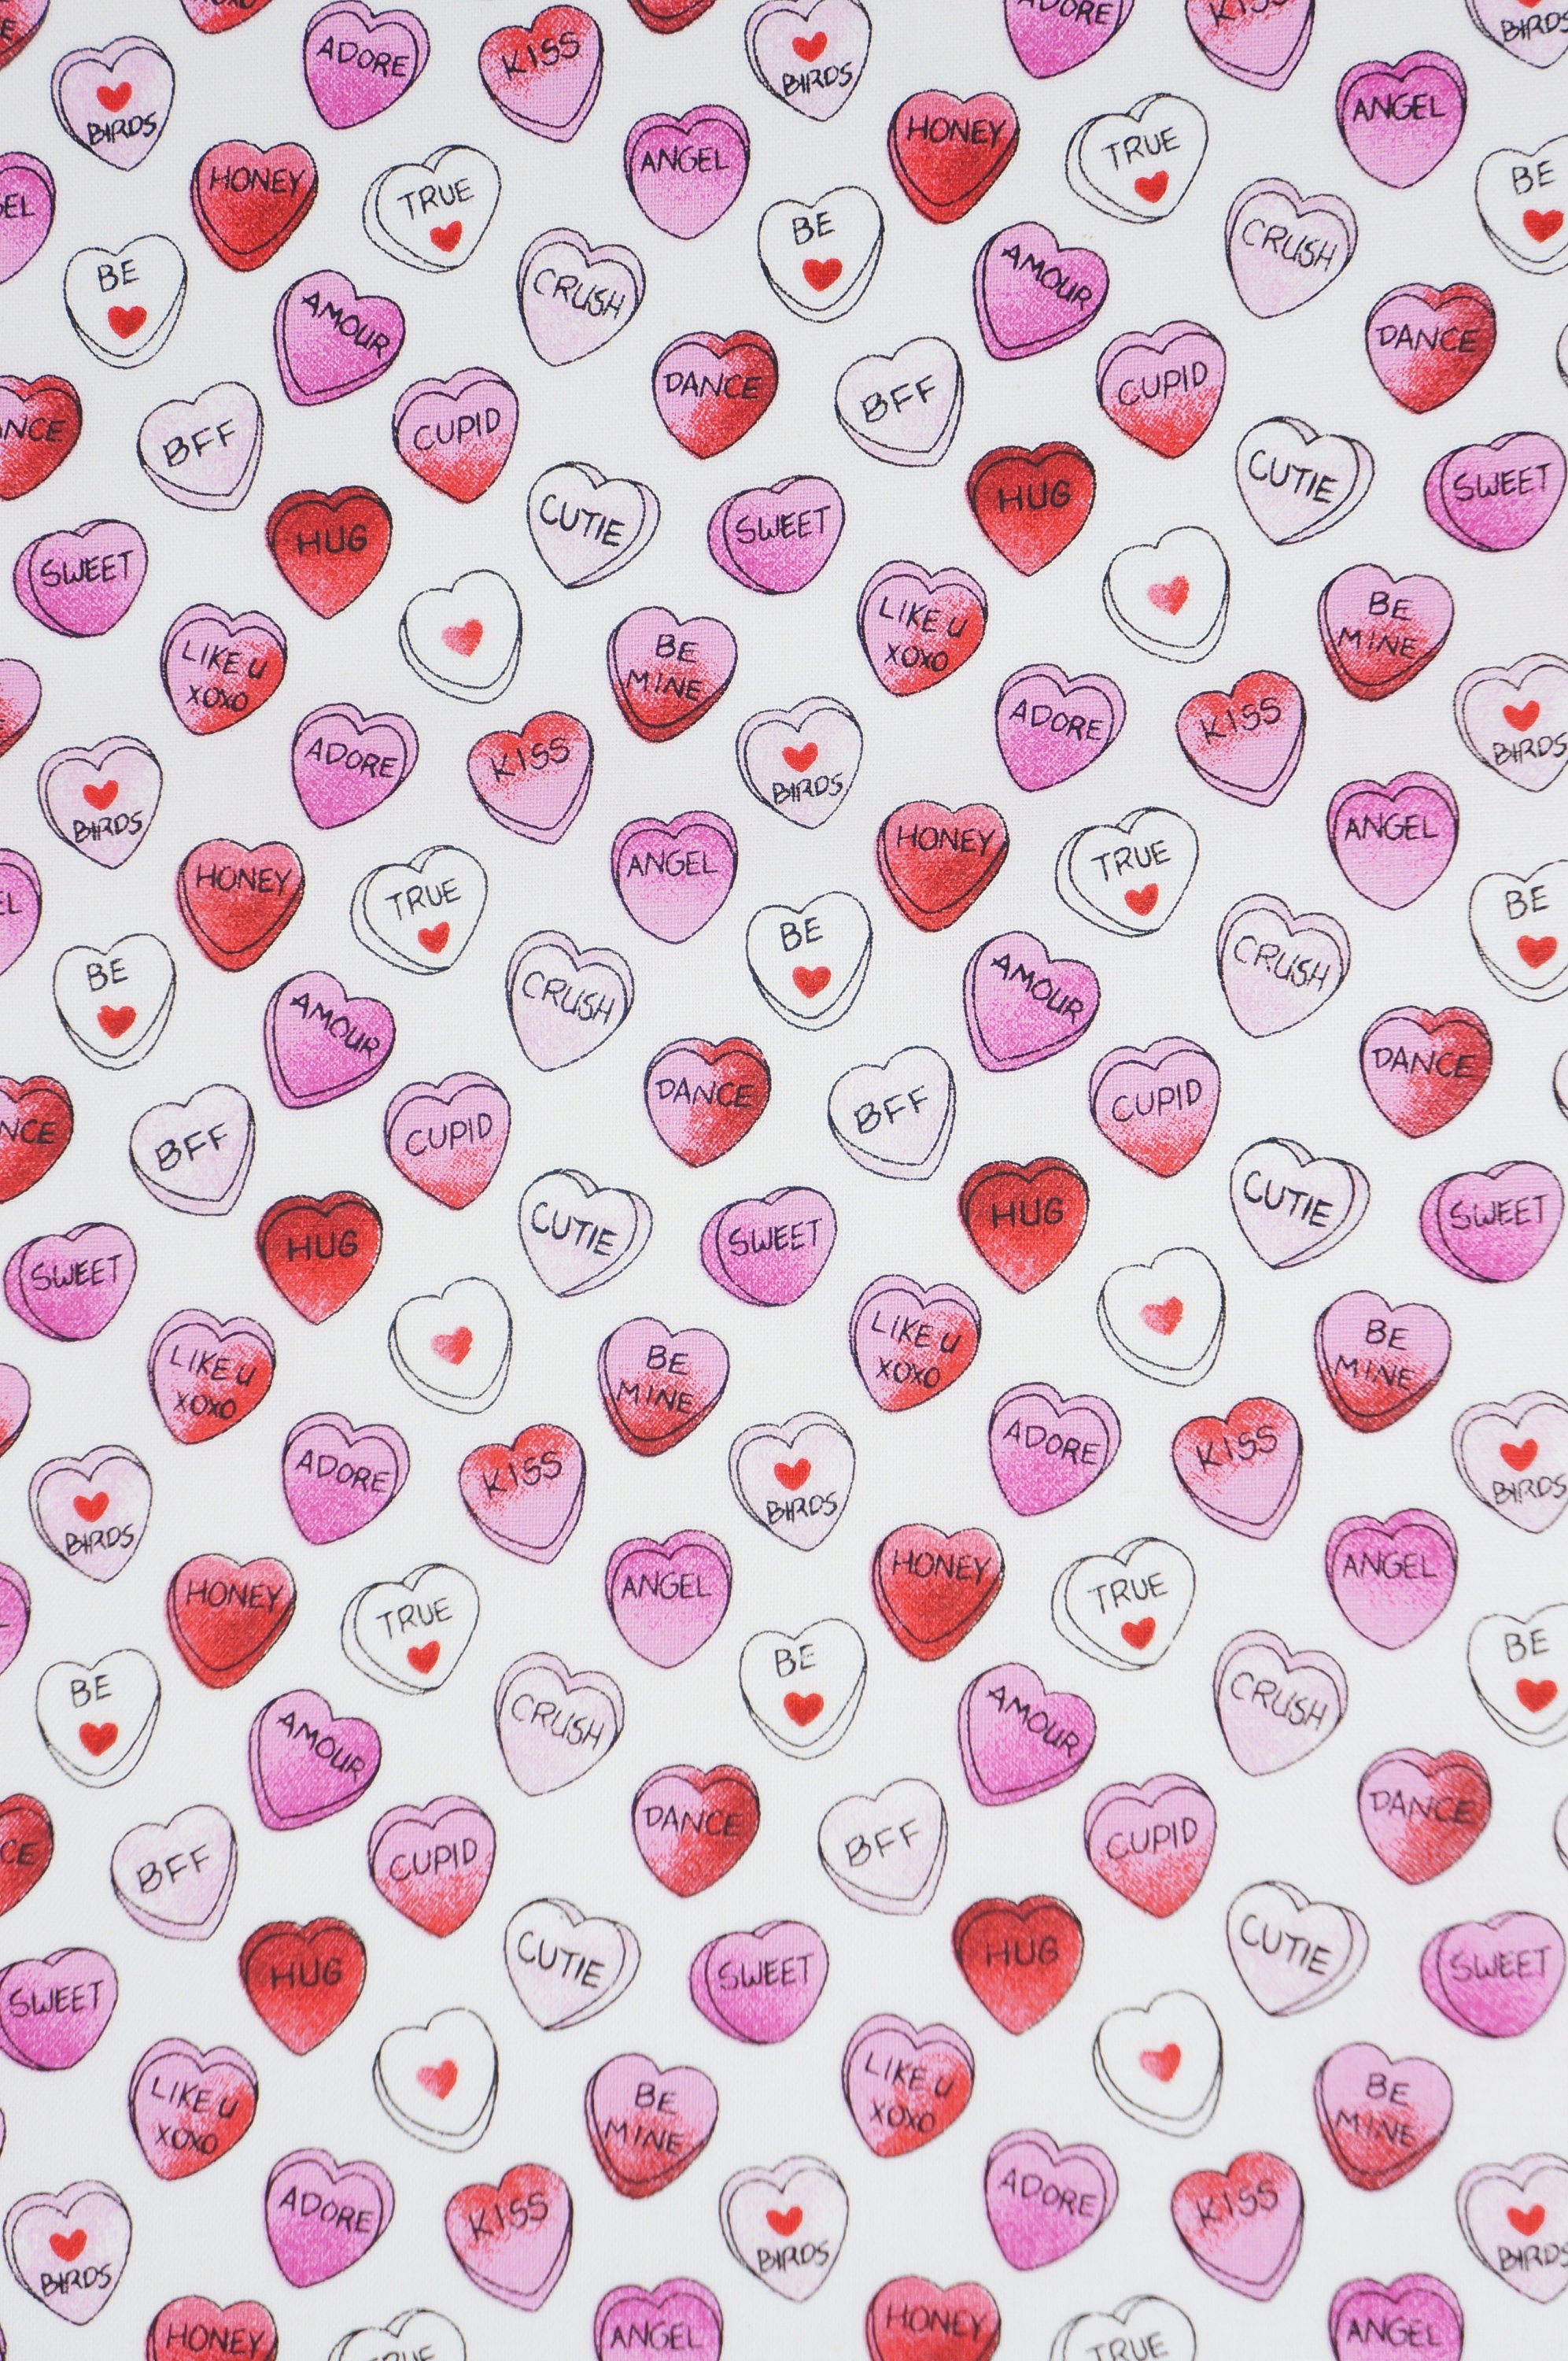 Candy Hearts Fabric, Valentines Day Fabric, 100% Cotton, Apparel Fabric,  Fabric by the yard, Accessories Fabric, Seasonal & Holiday